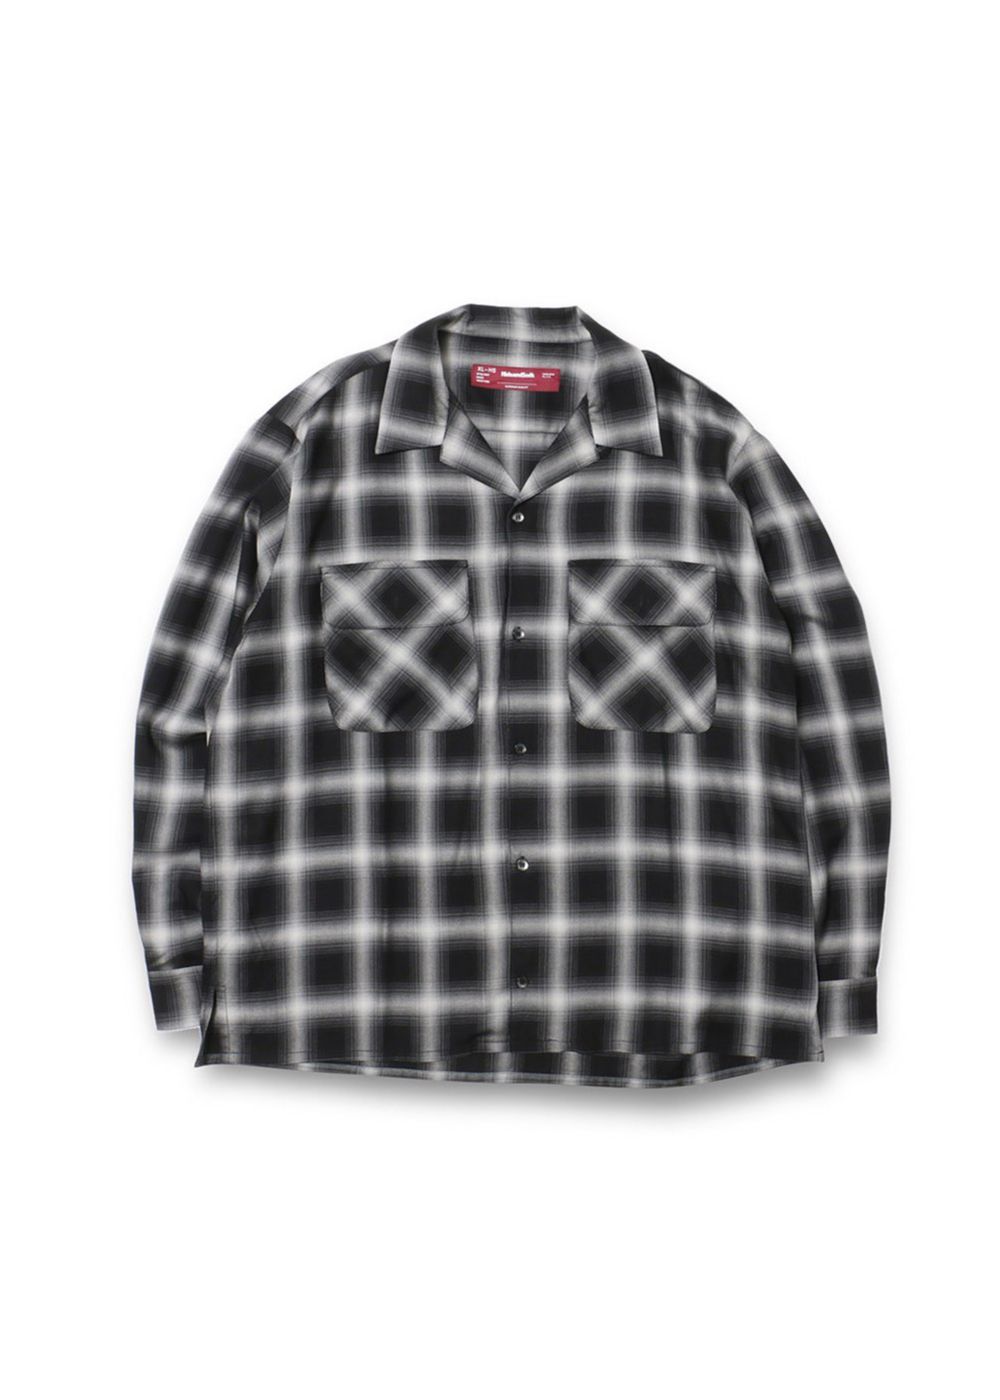 HIDE AND SEEK - OMBRE CHECK L/S SHIRT (BLACK) / オンブレチェック 